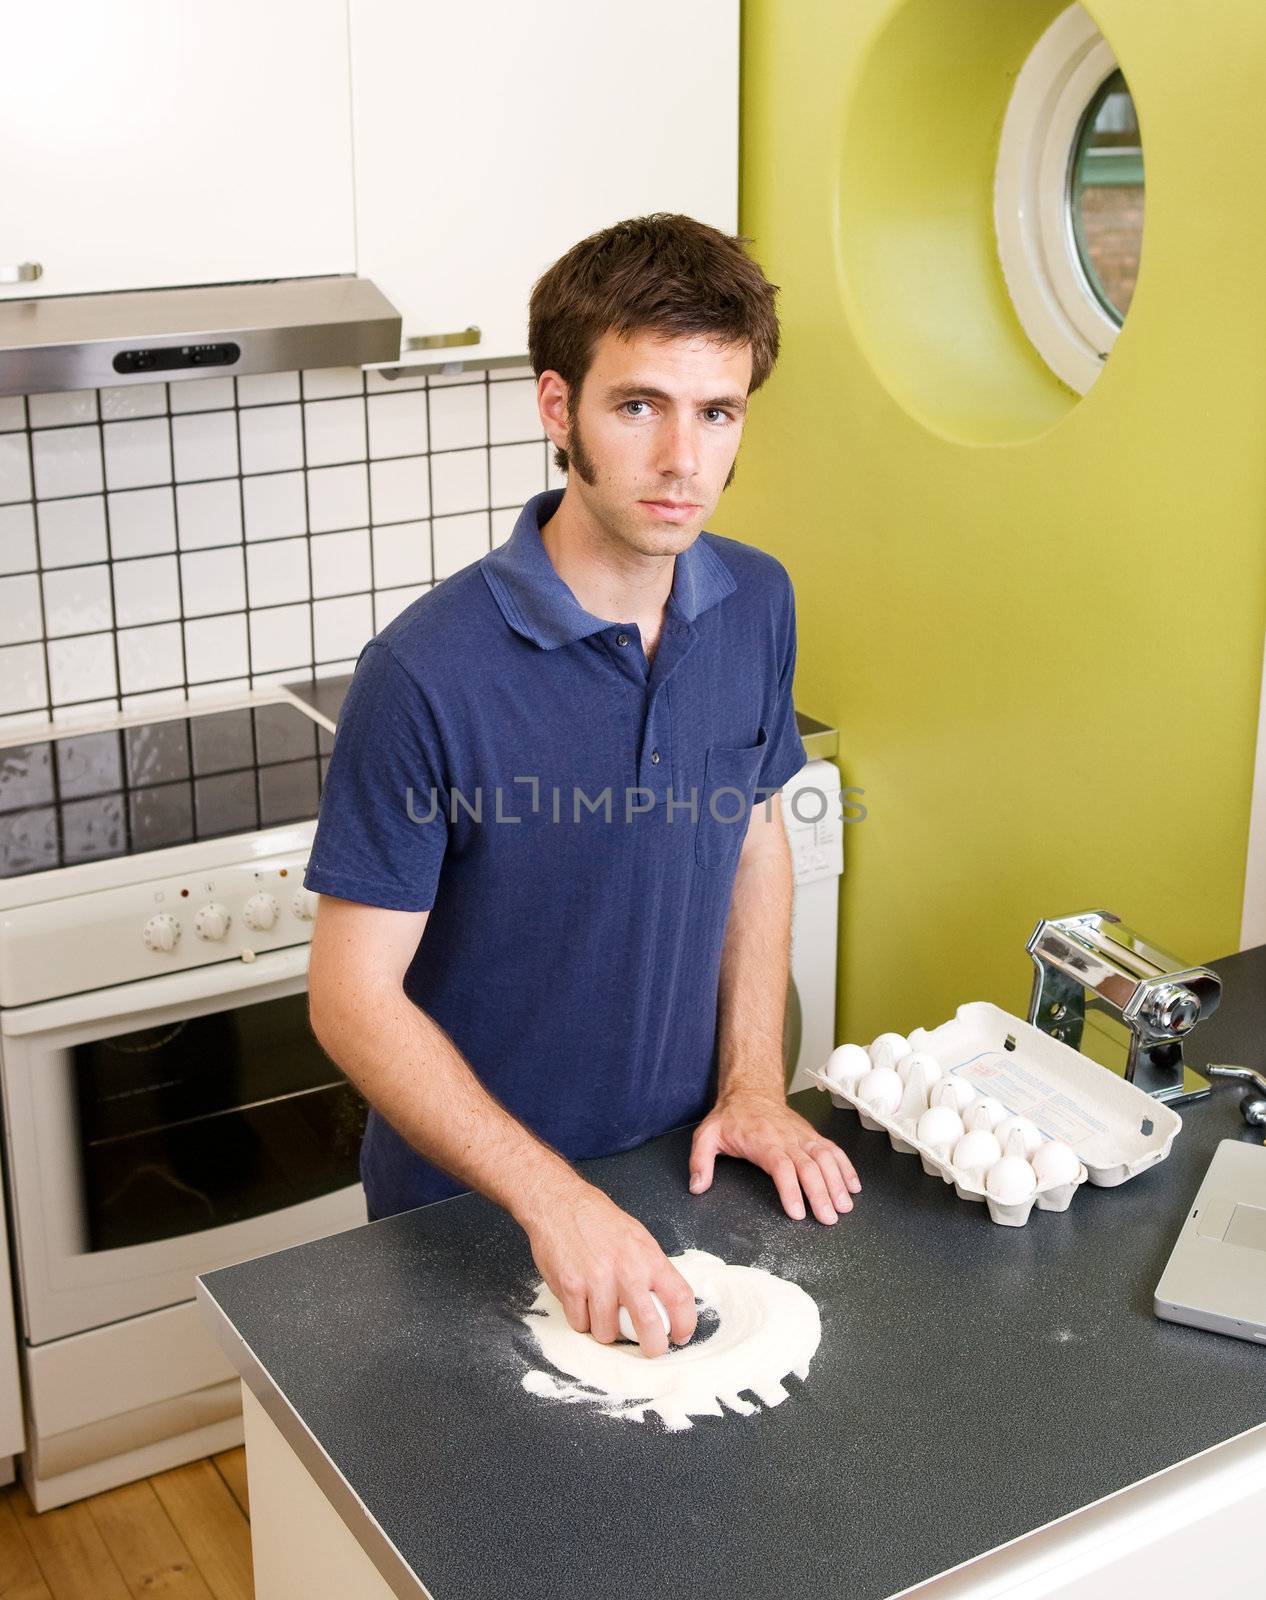 A young man making pasta at home in an apartment kitchen.